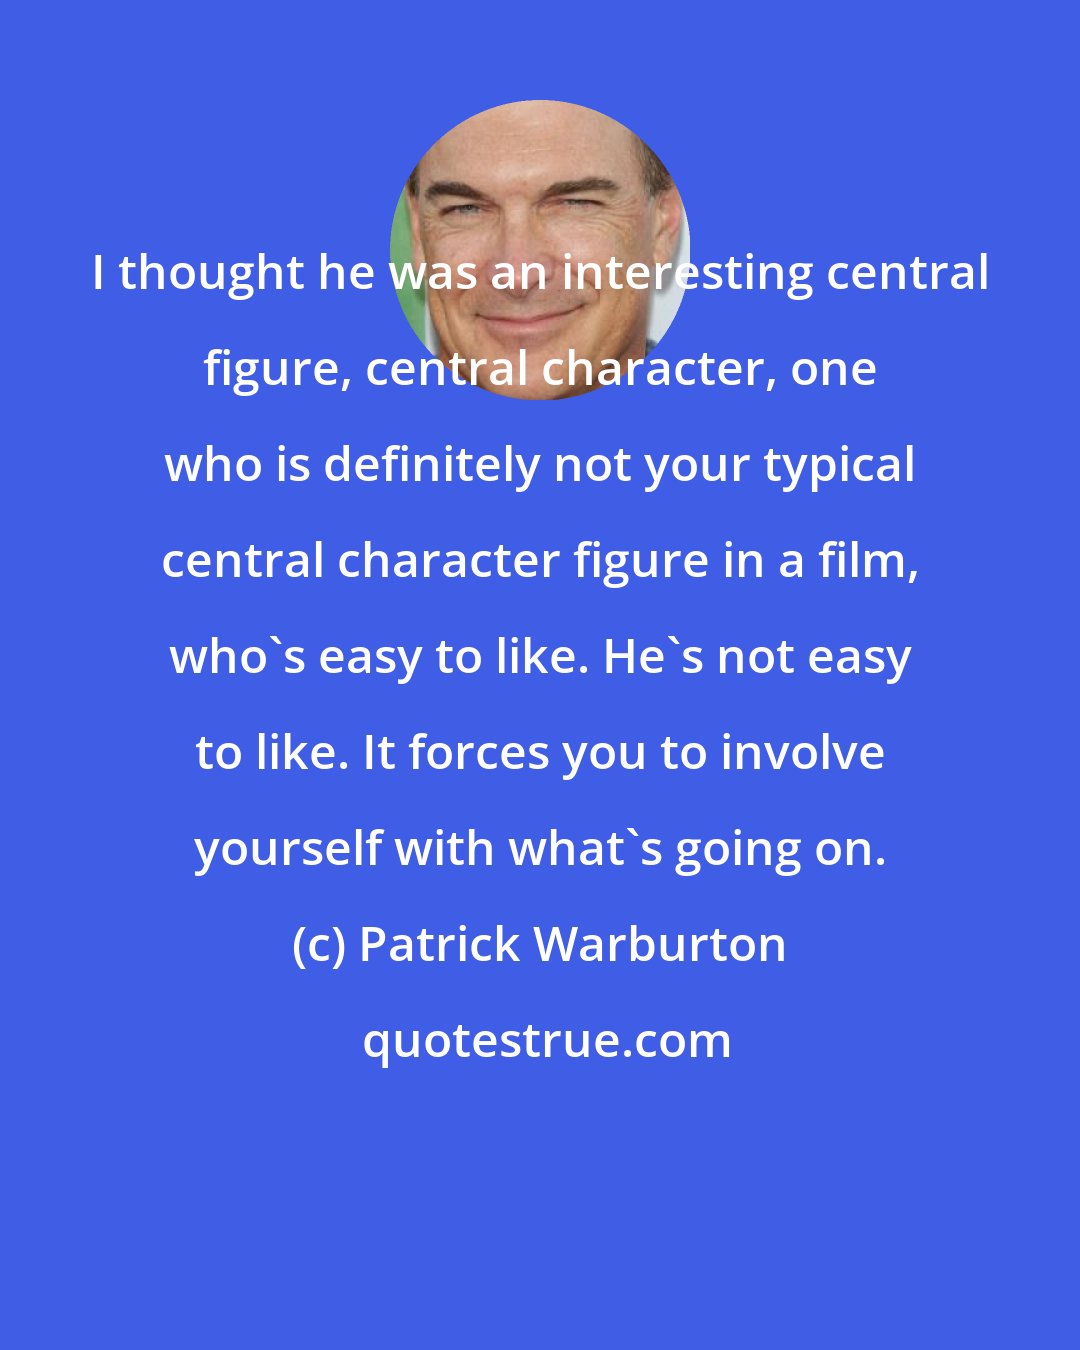 Patrick Warburton: I thought he was an interesting central figure, central character, one who is definitely not your typical central character figure in a film, who's easy to like. He's not easy to like. It forces you to involve yourself with what's going on.